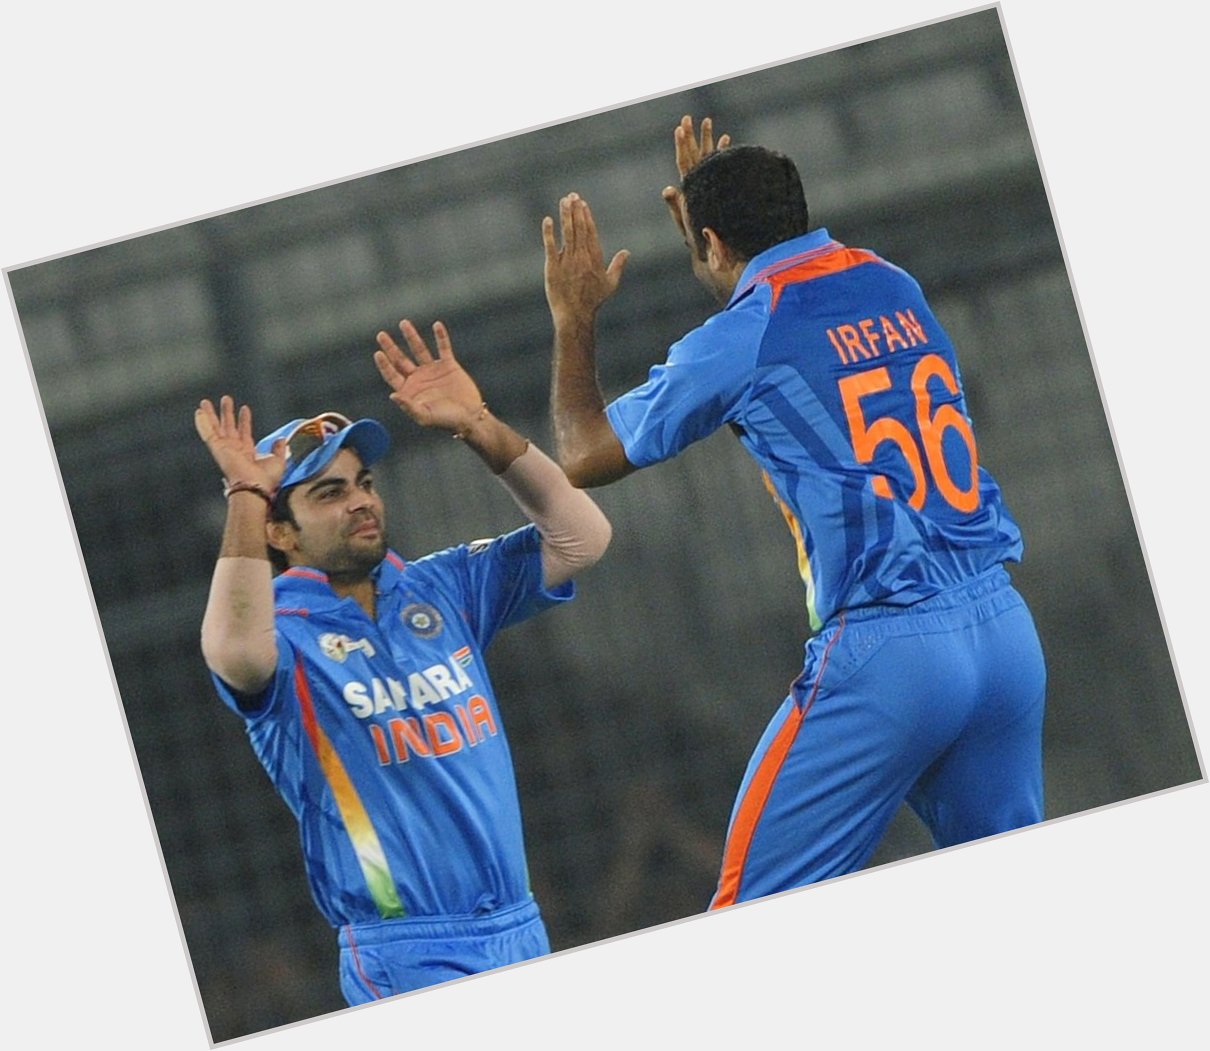 Wishing A Very Happy Birthday To Irfan Pathan on Behalf Of All Viratians!   